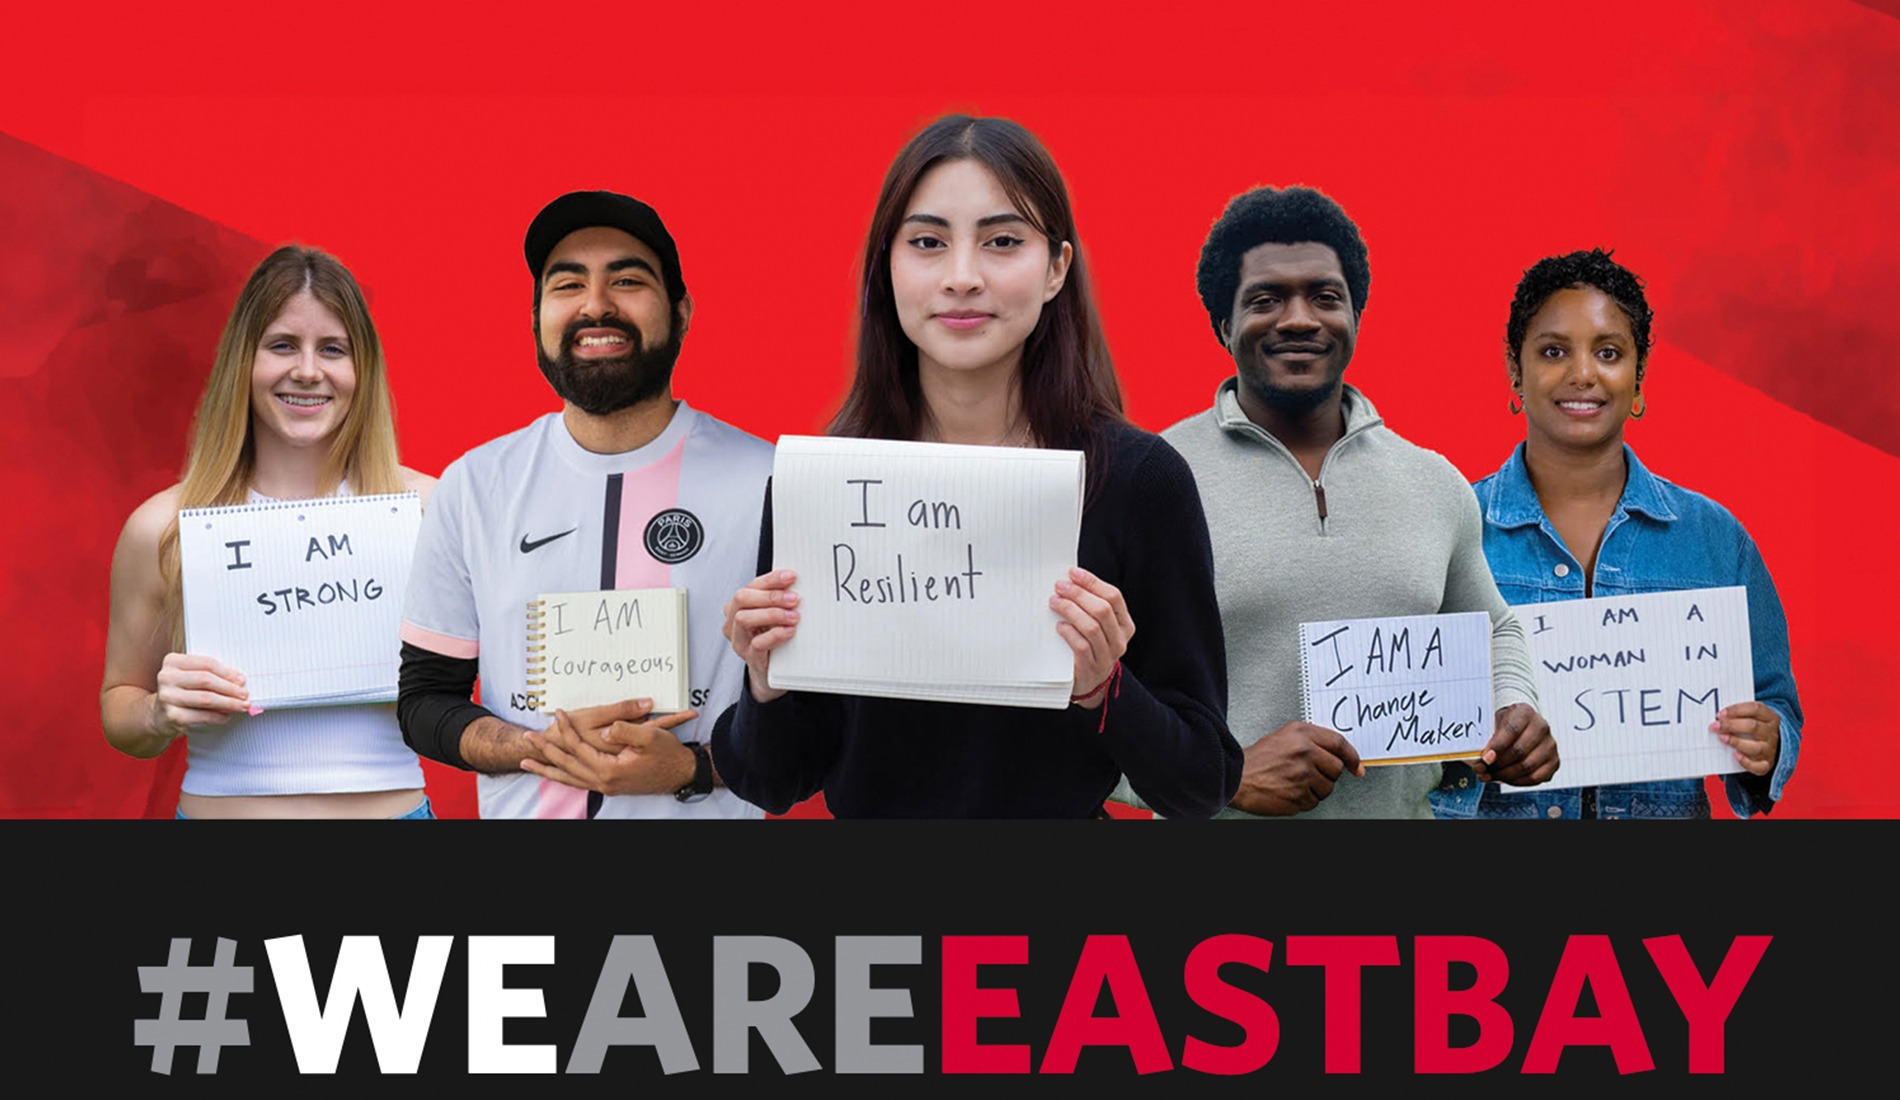 Students holding up #WeAreEastBay signs